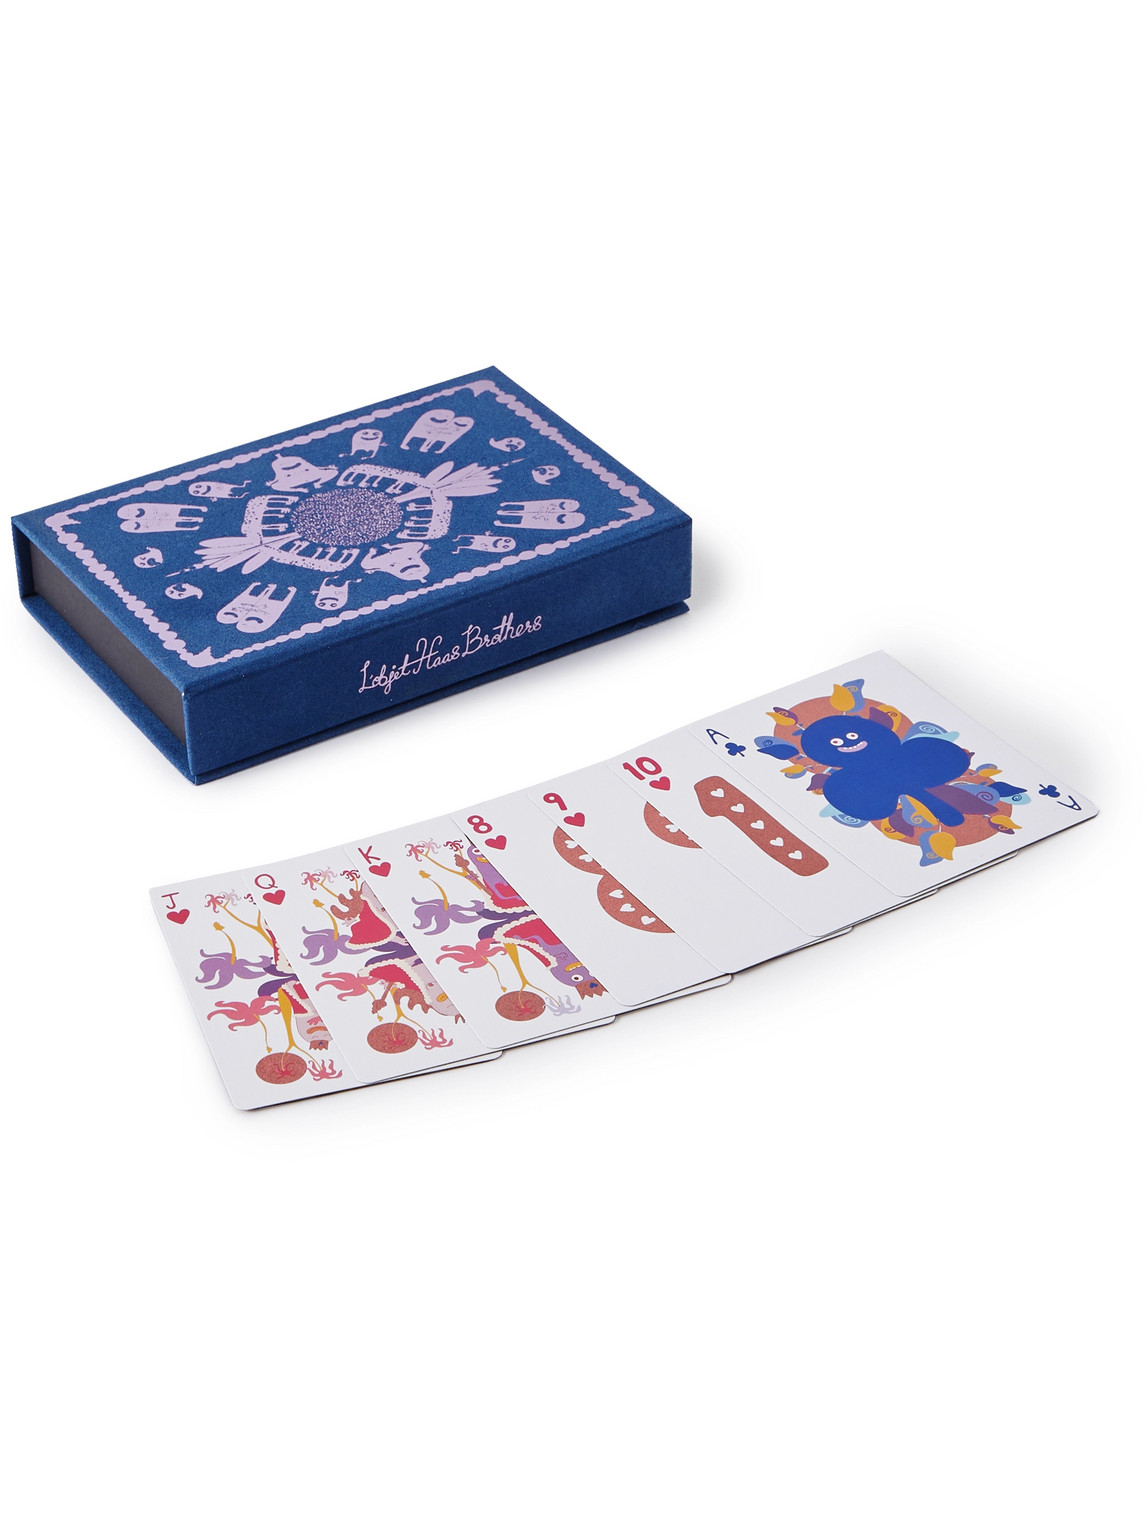 L'Objet - Haas Brothers Jumbo Set of Two Playing Cards - Men - Blue von L'Objet